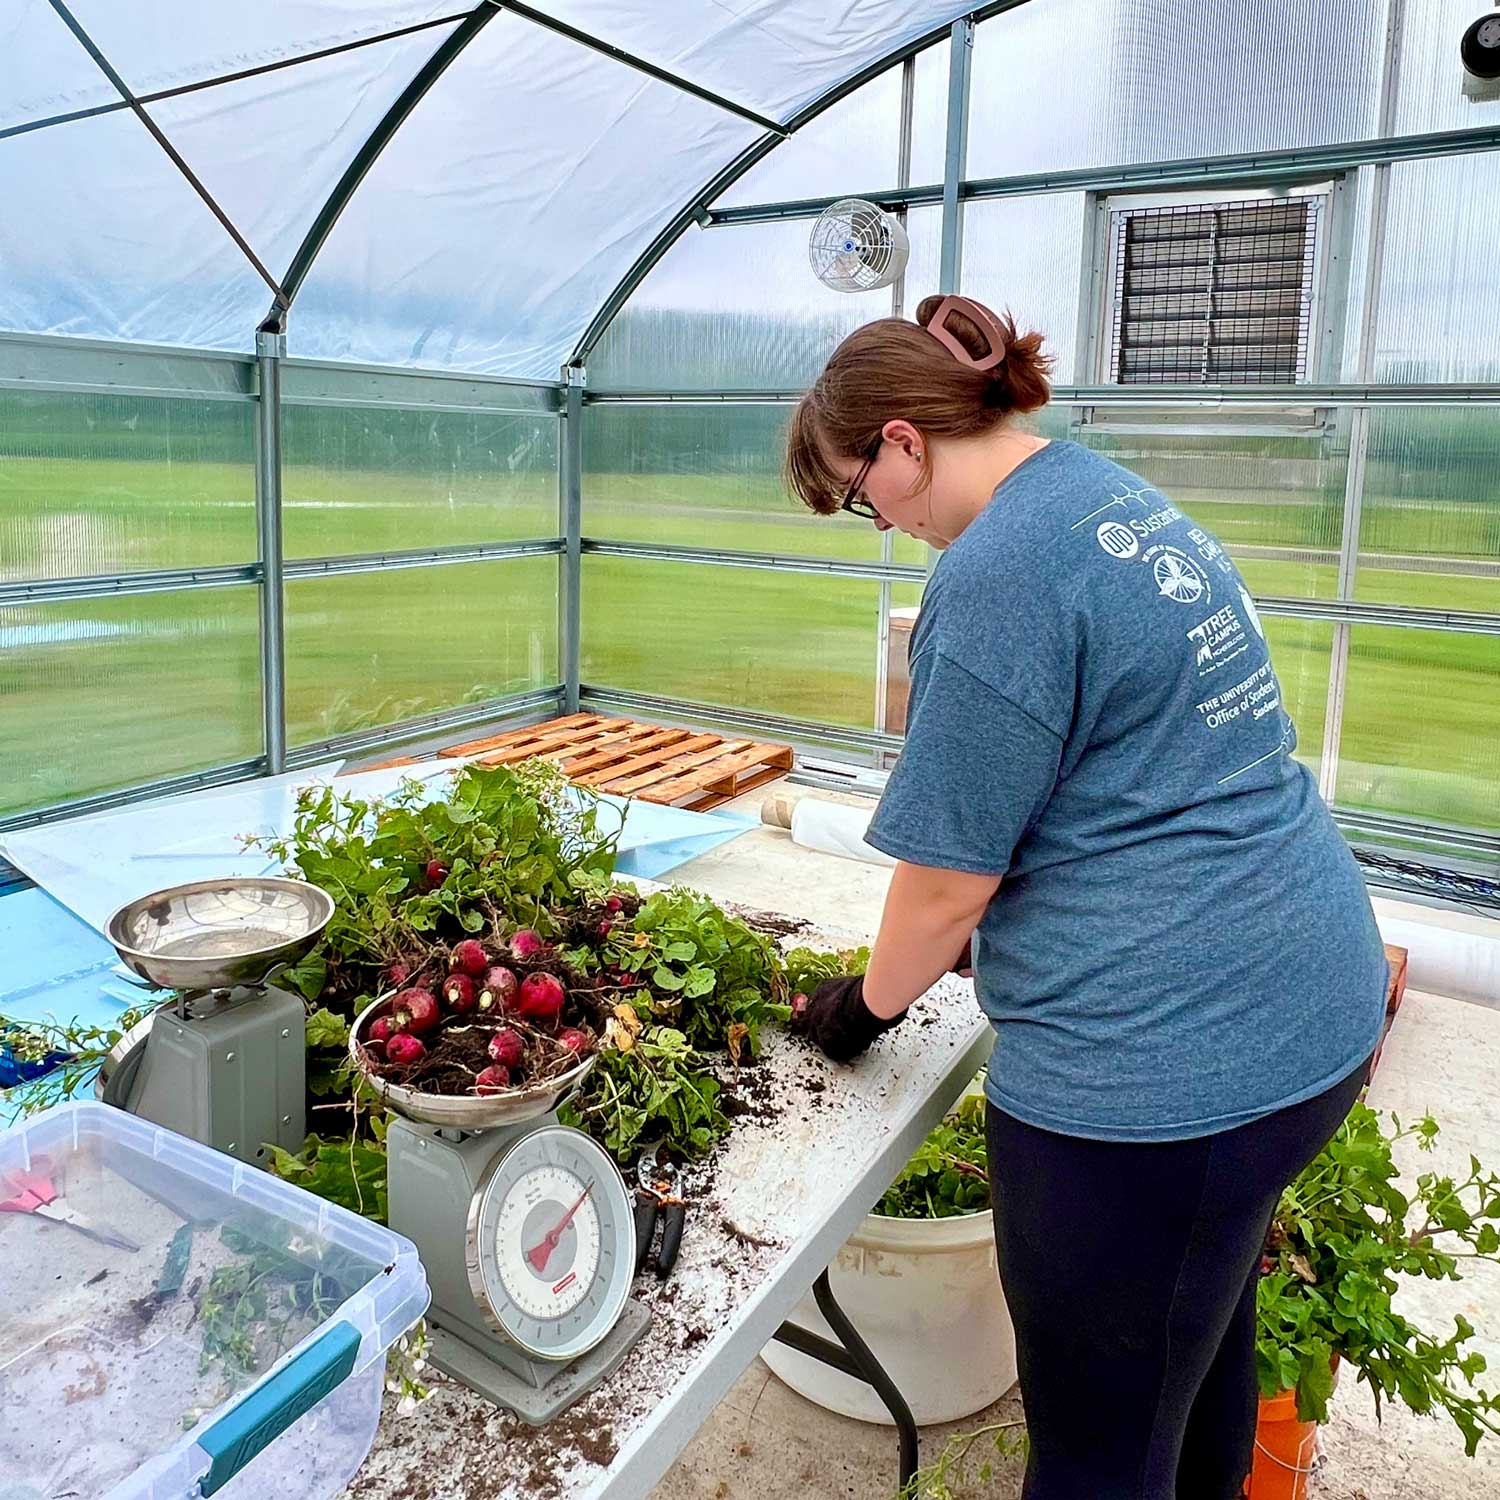 A student examines a selection of radishes at a table inside a greenhouse. Some of the vegetables are being weighed on a scale.